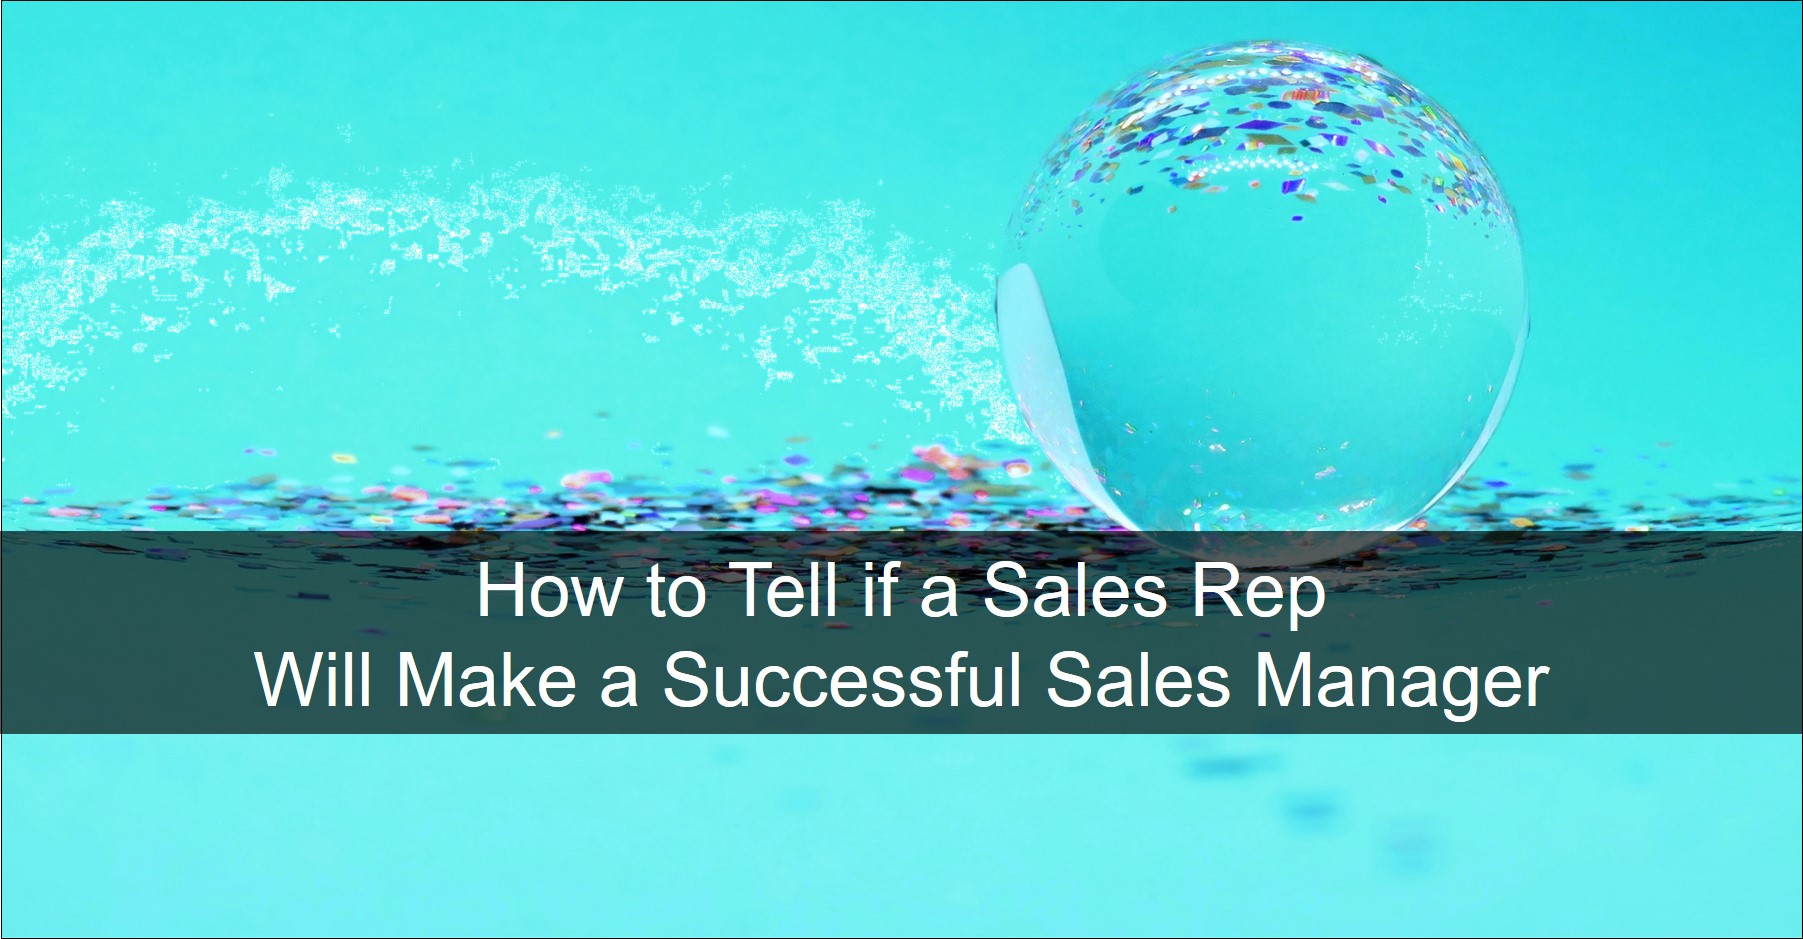 Blog 20190807 - How to Tell ... Sales Manager 1a